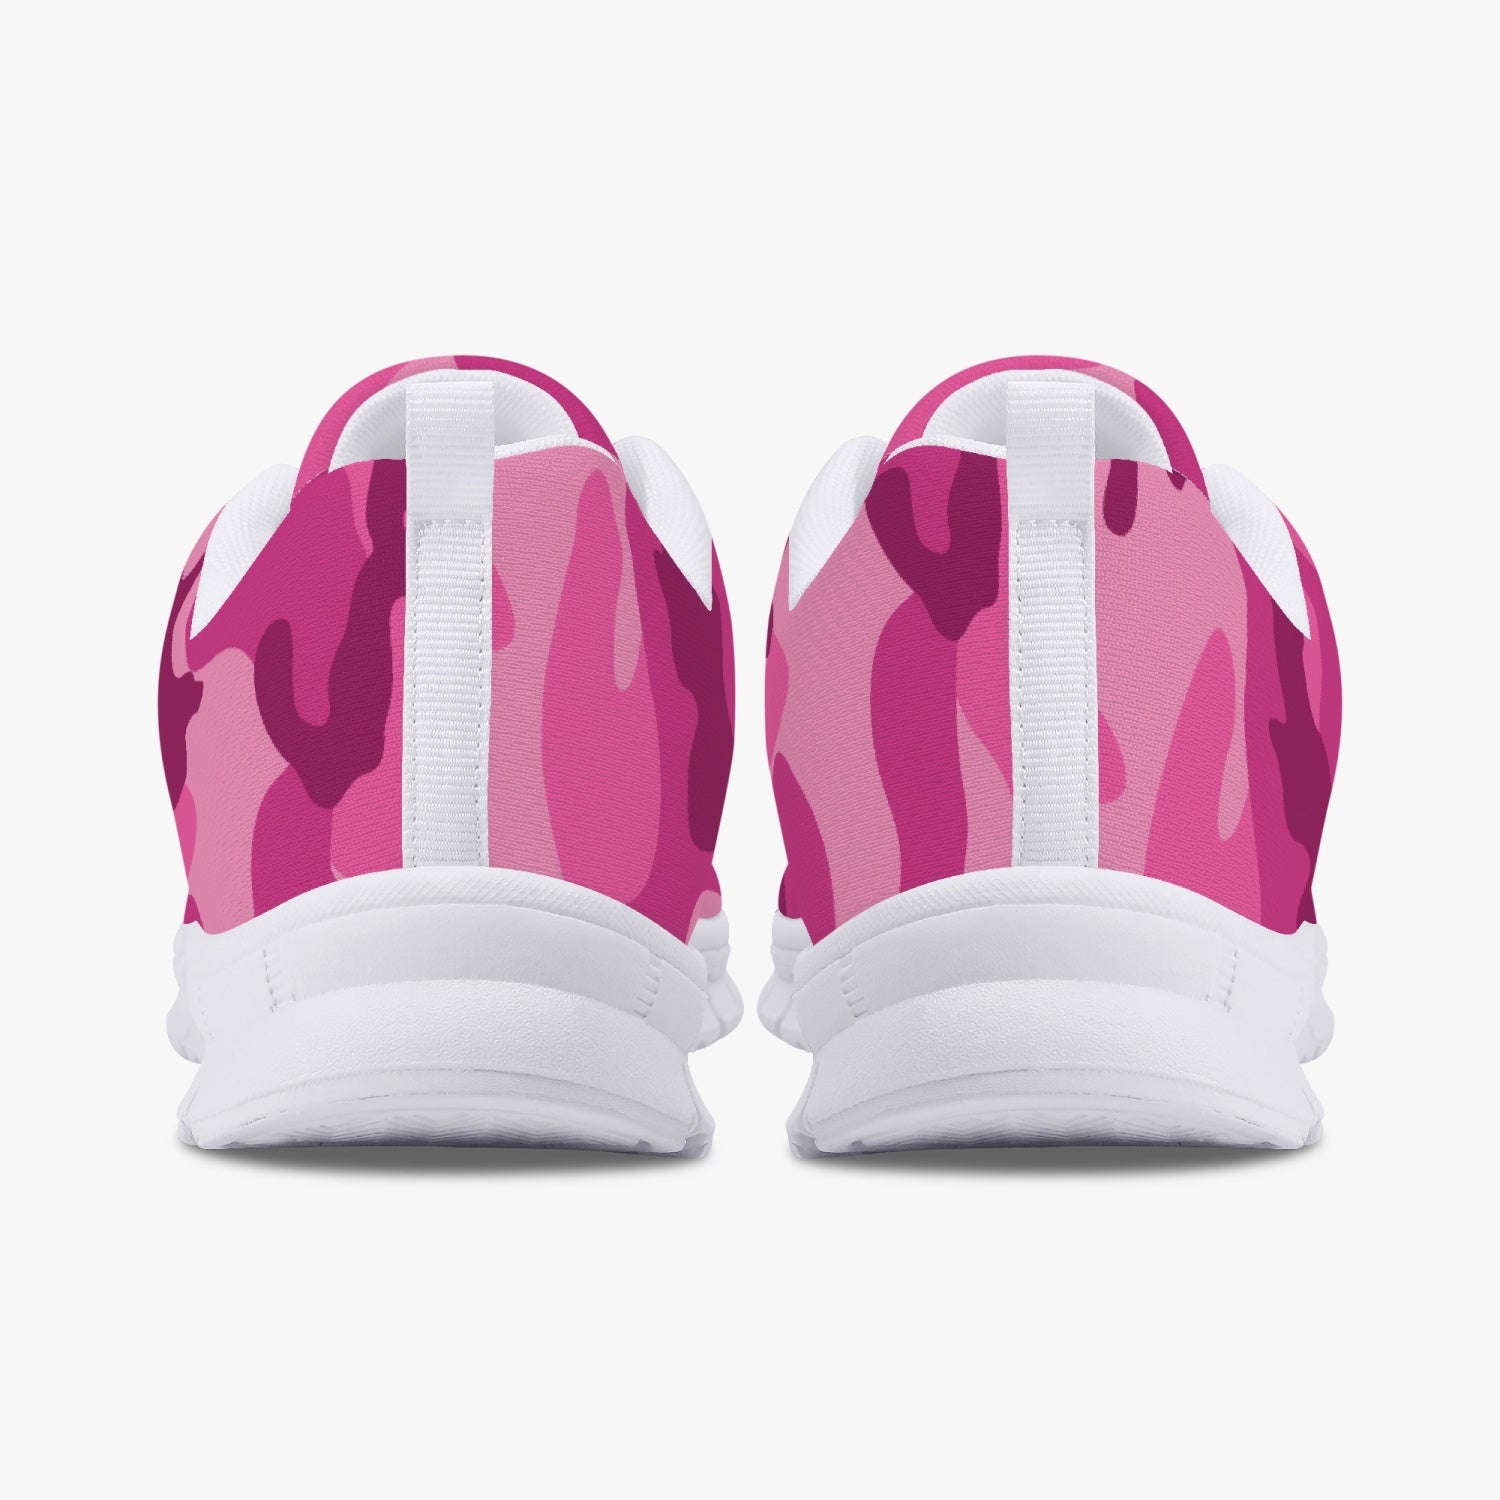 All Pink Camo Sneakers